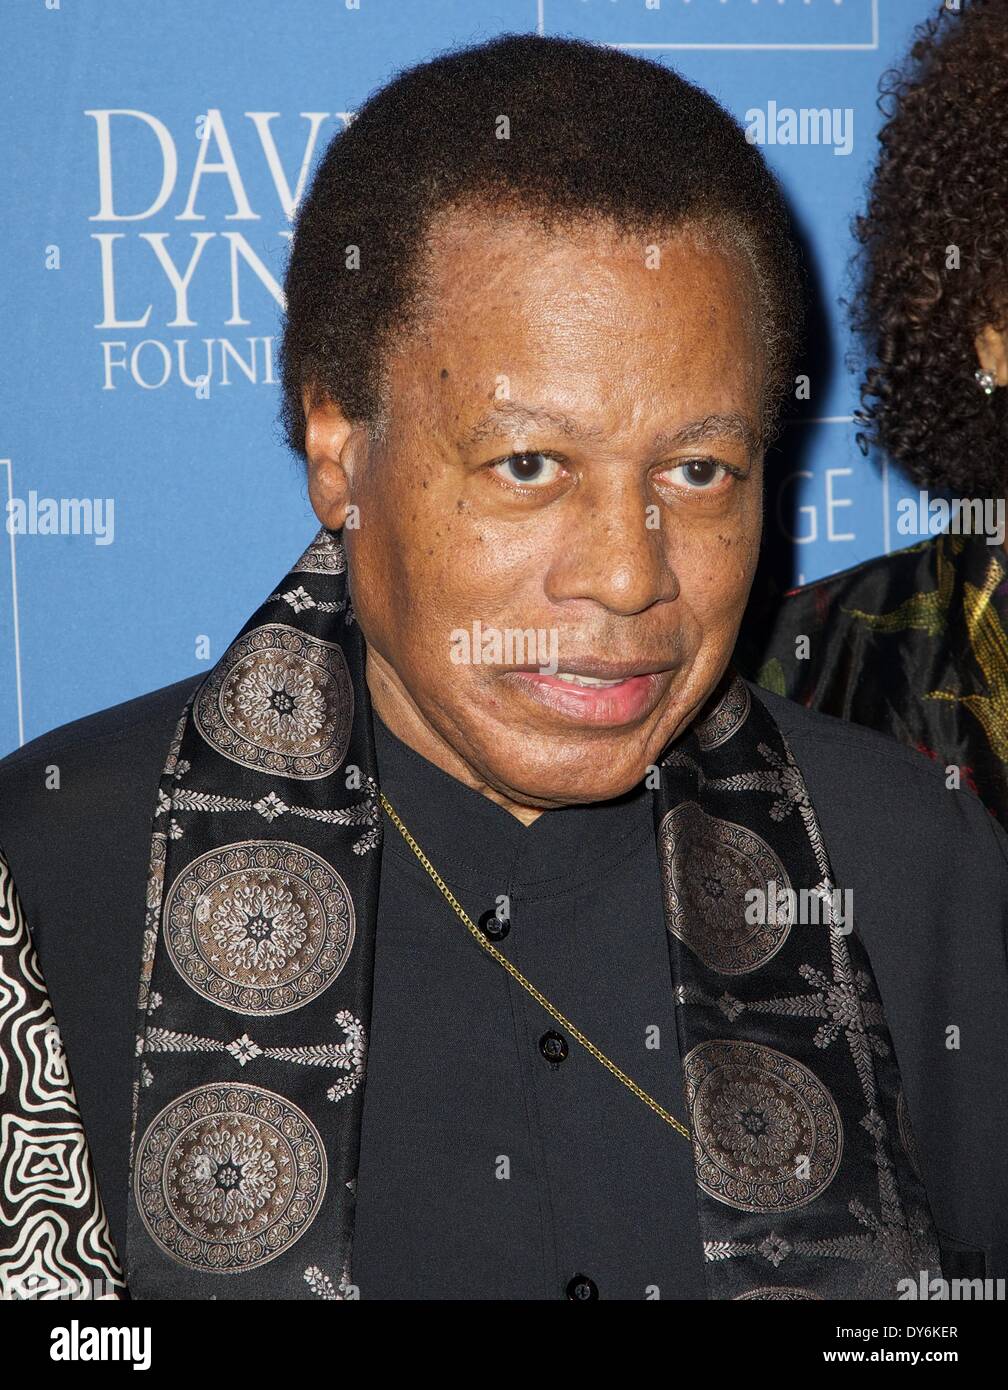 Celebrities attend An Intimate Night Of Jazz at Frederick P. Rose Hall at Lincoln CenterFeaturing: Wayne Shorter Where: New York City USAWhen: 13 Dec 2012 Stock Photo